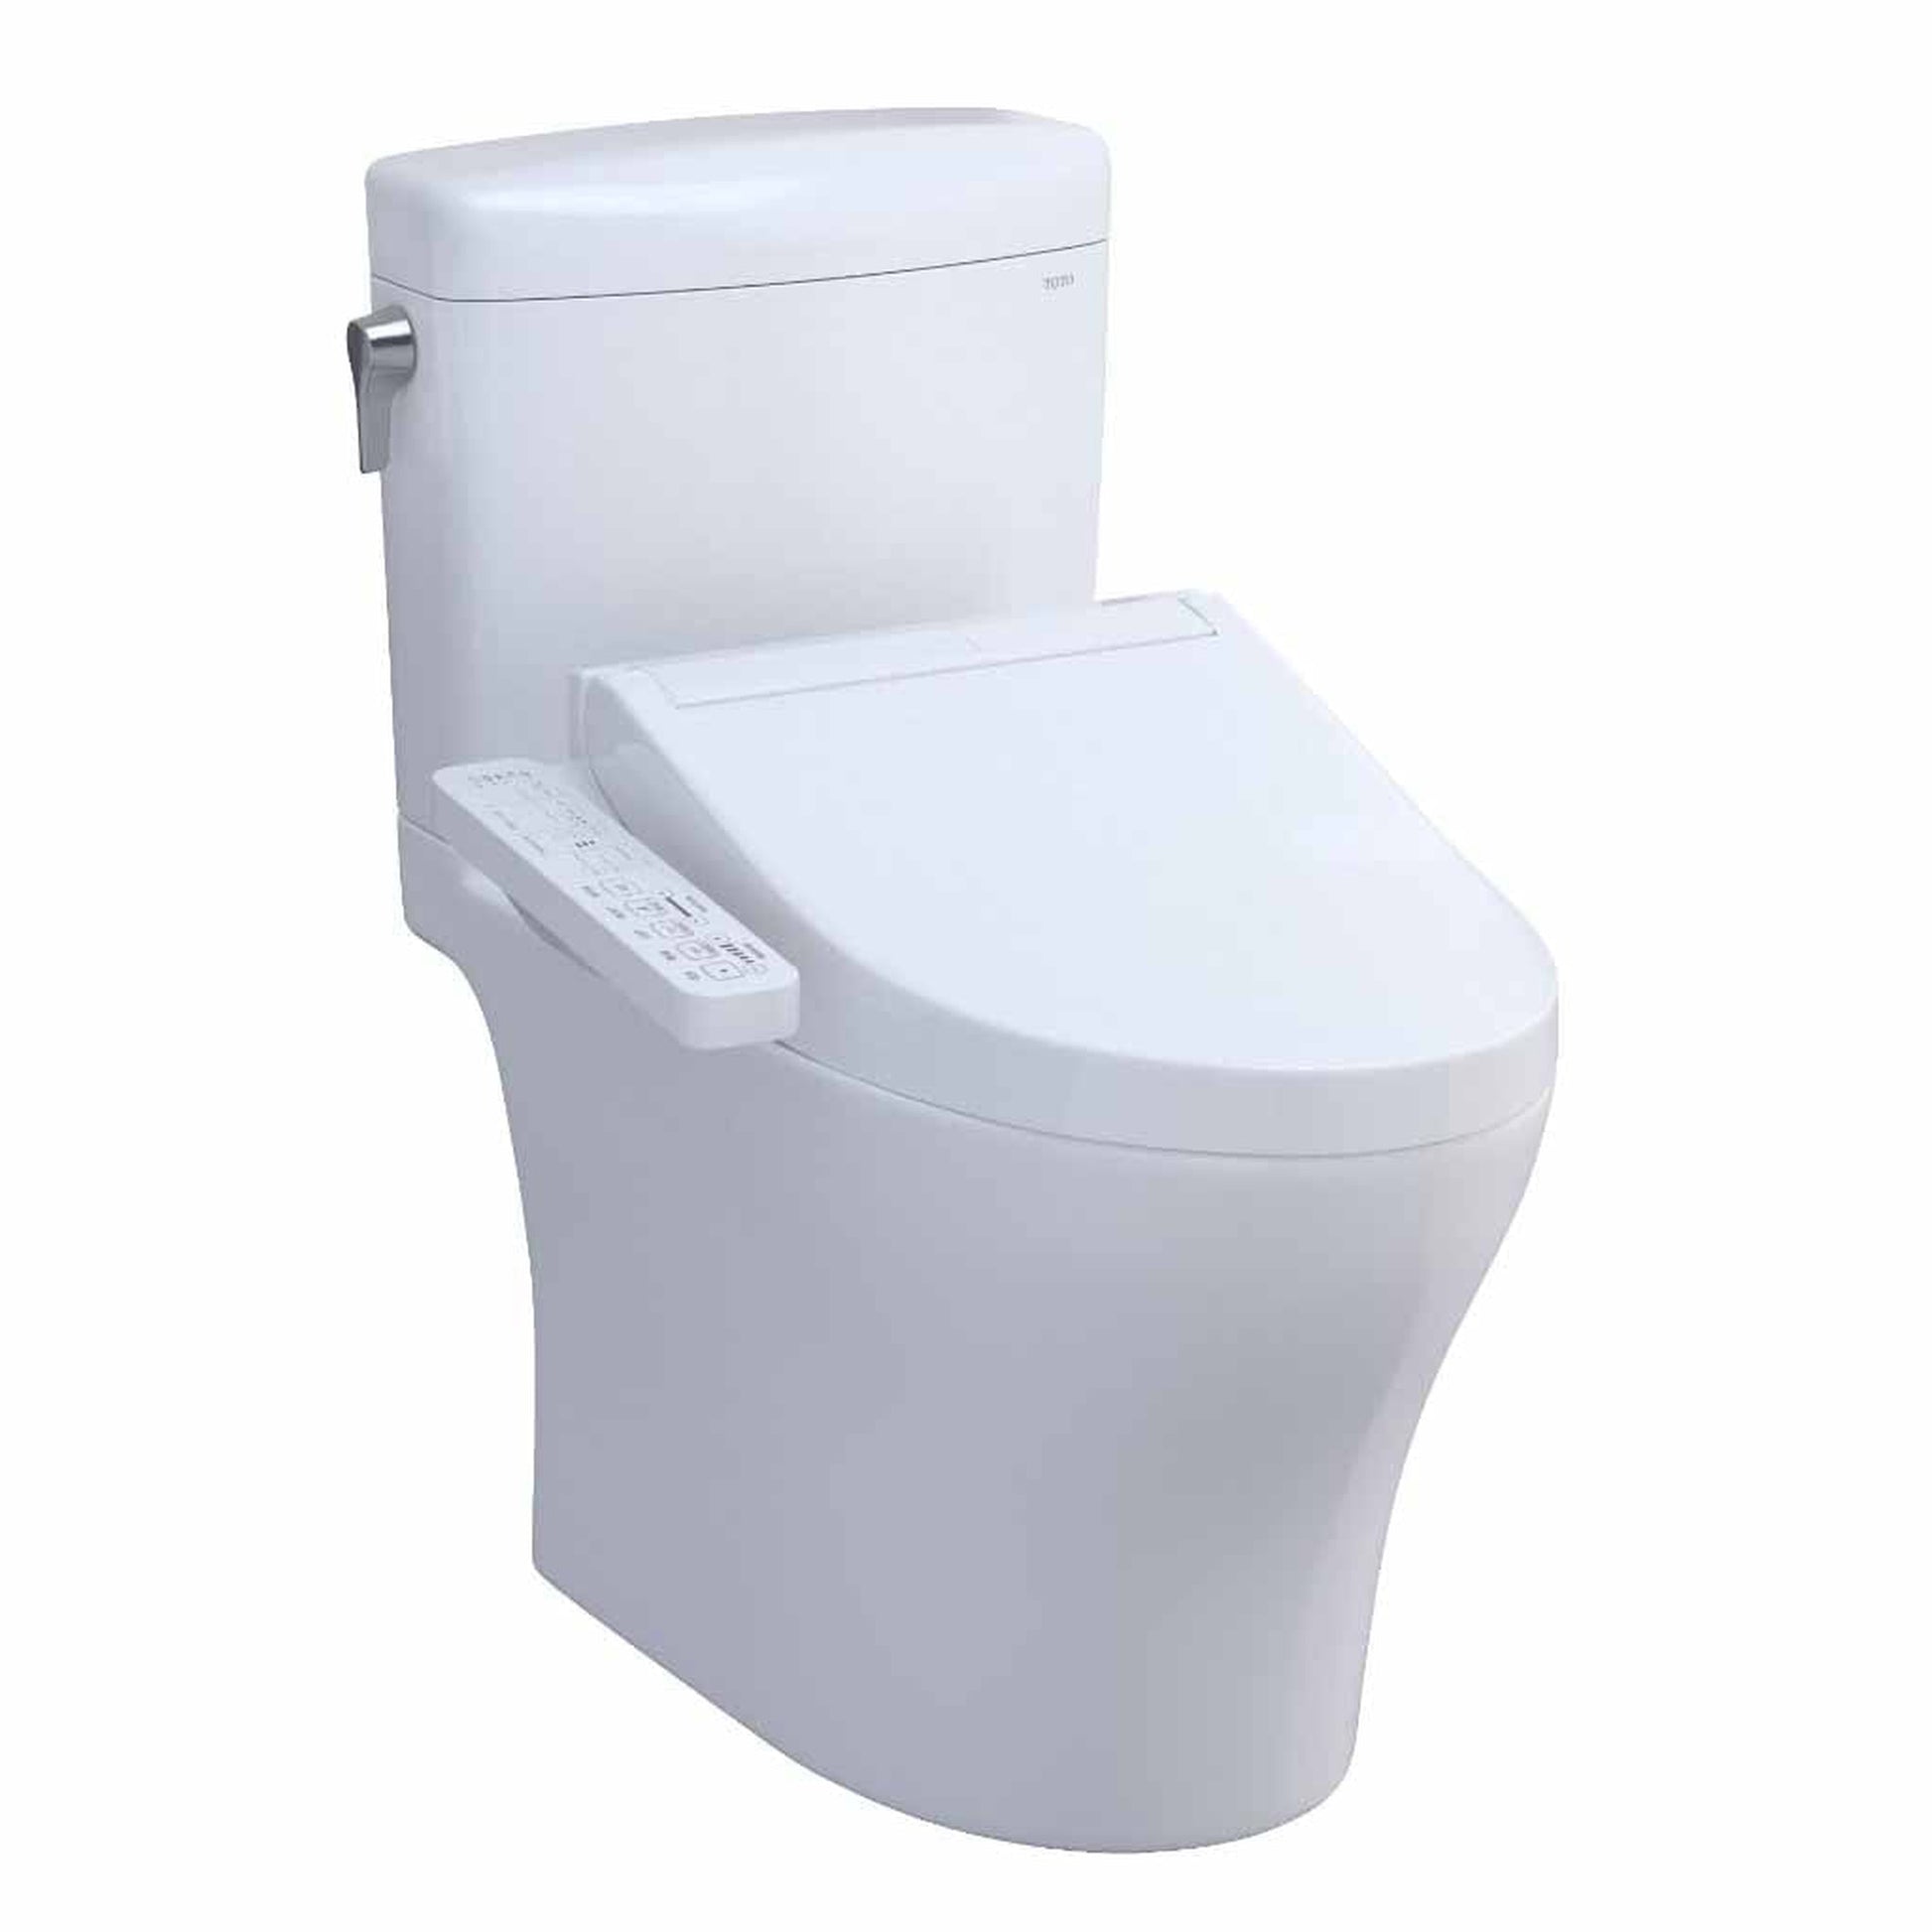 Wc and bidet: the minimum distances to be respected to guarantee